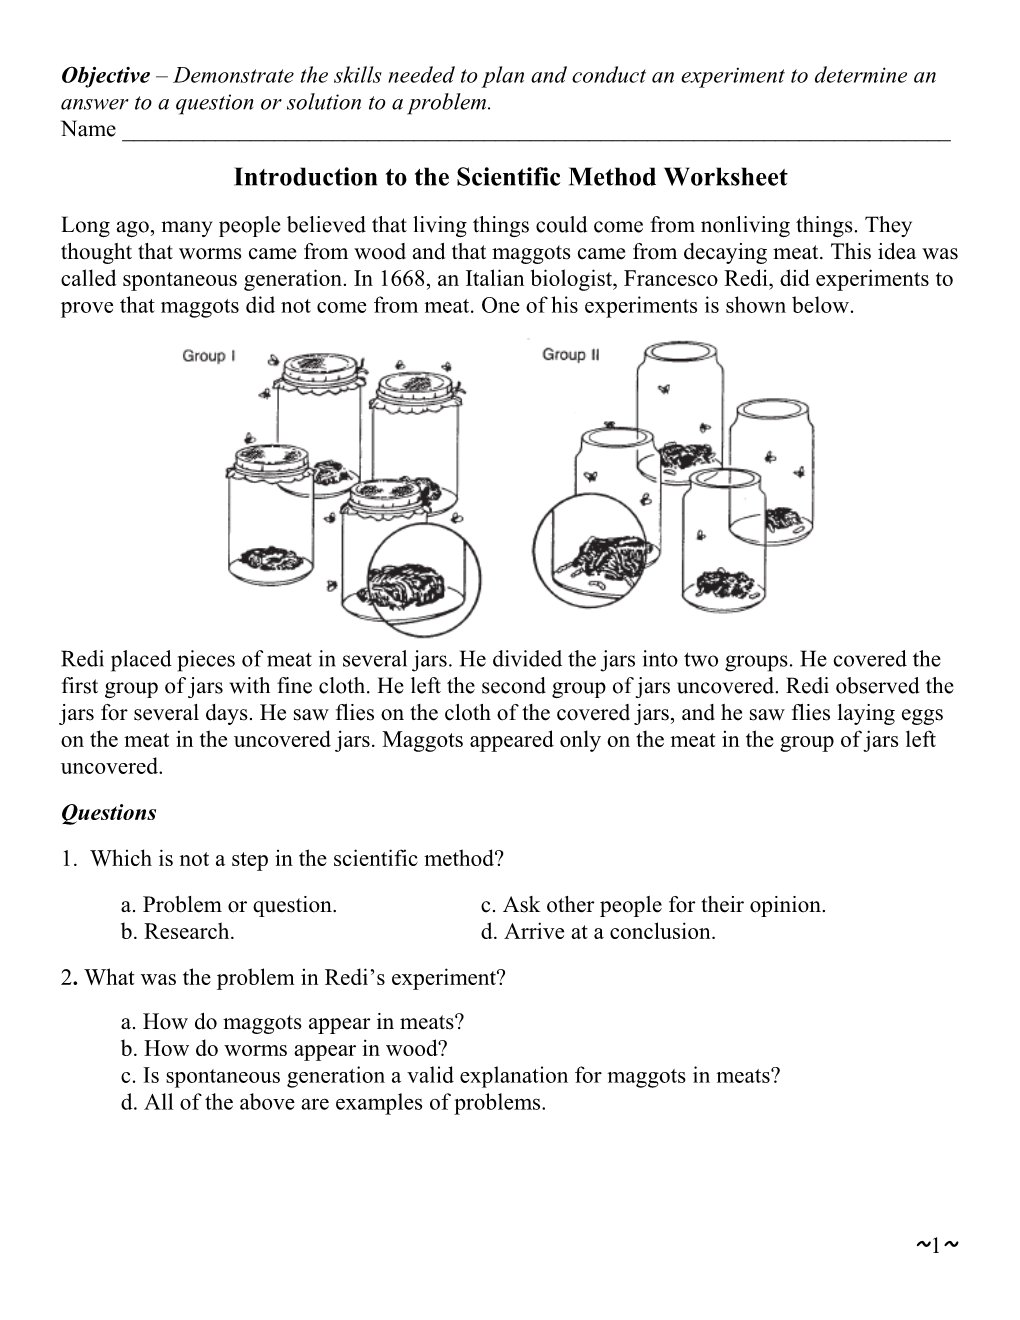 Introduction to the Scientific Method Worksheet